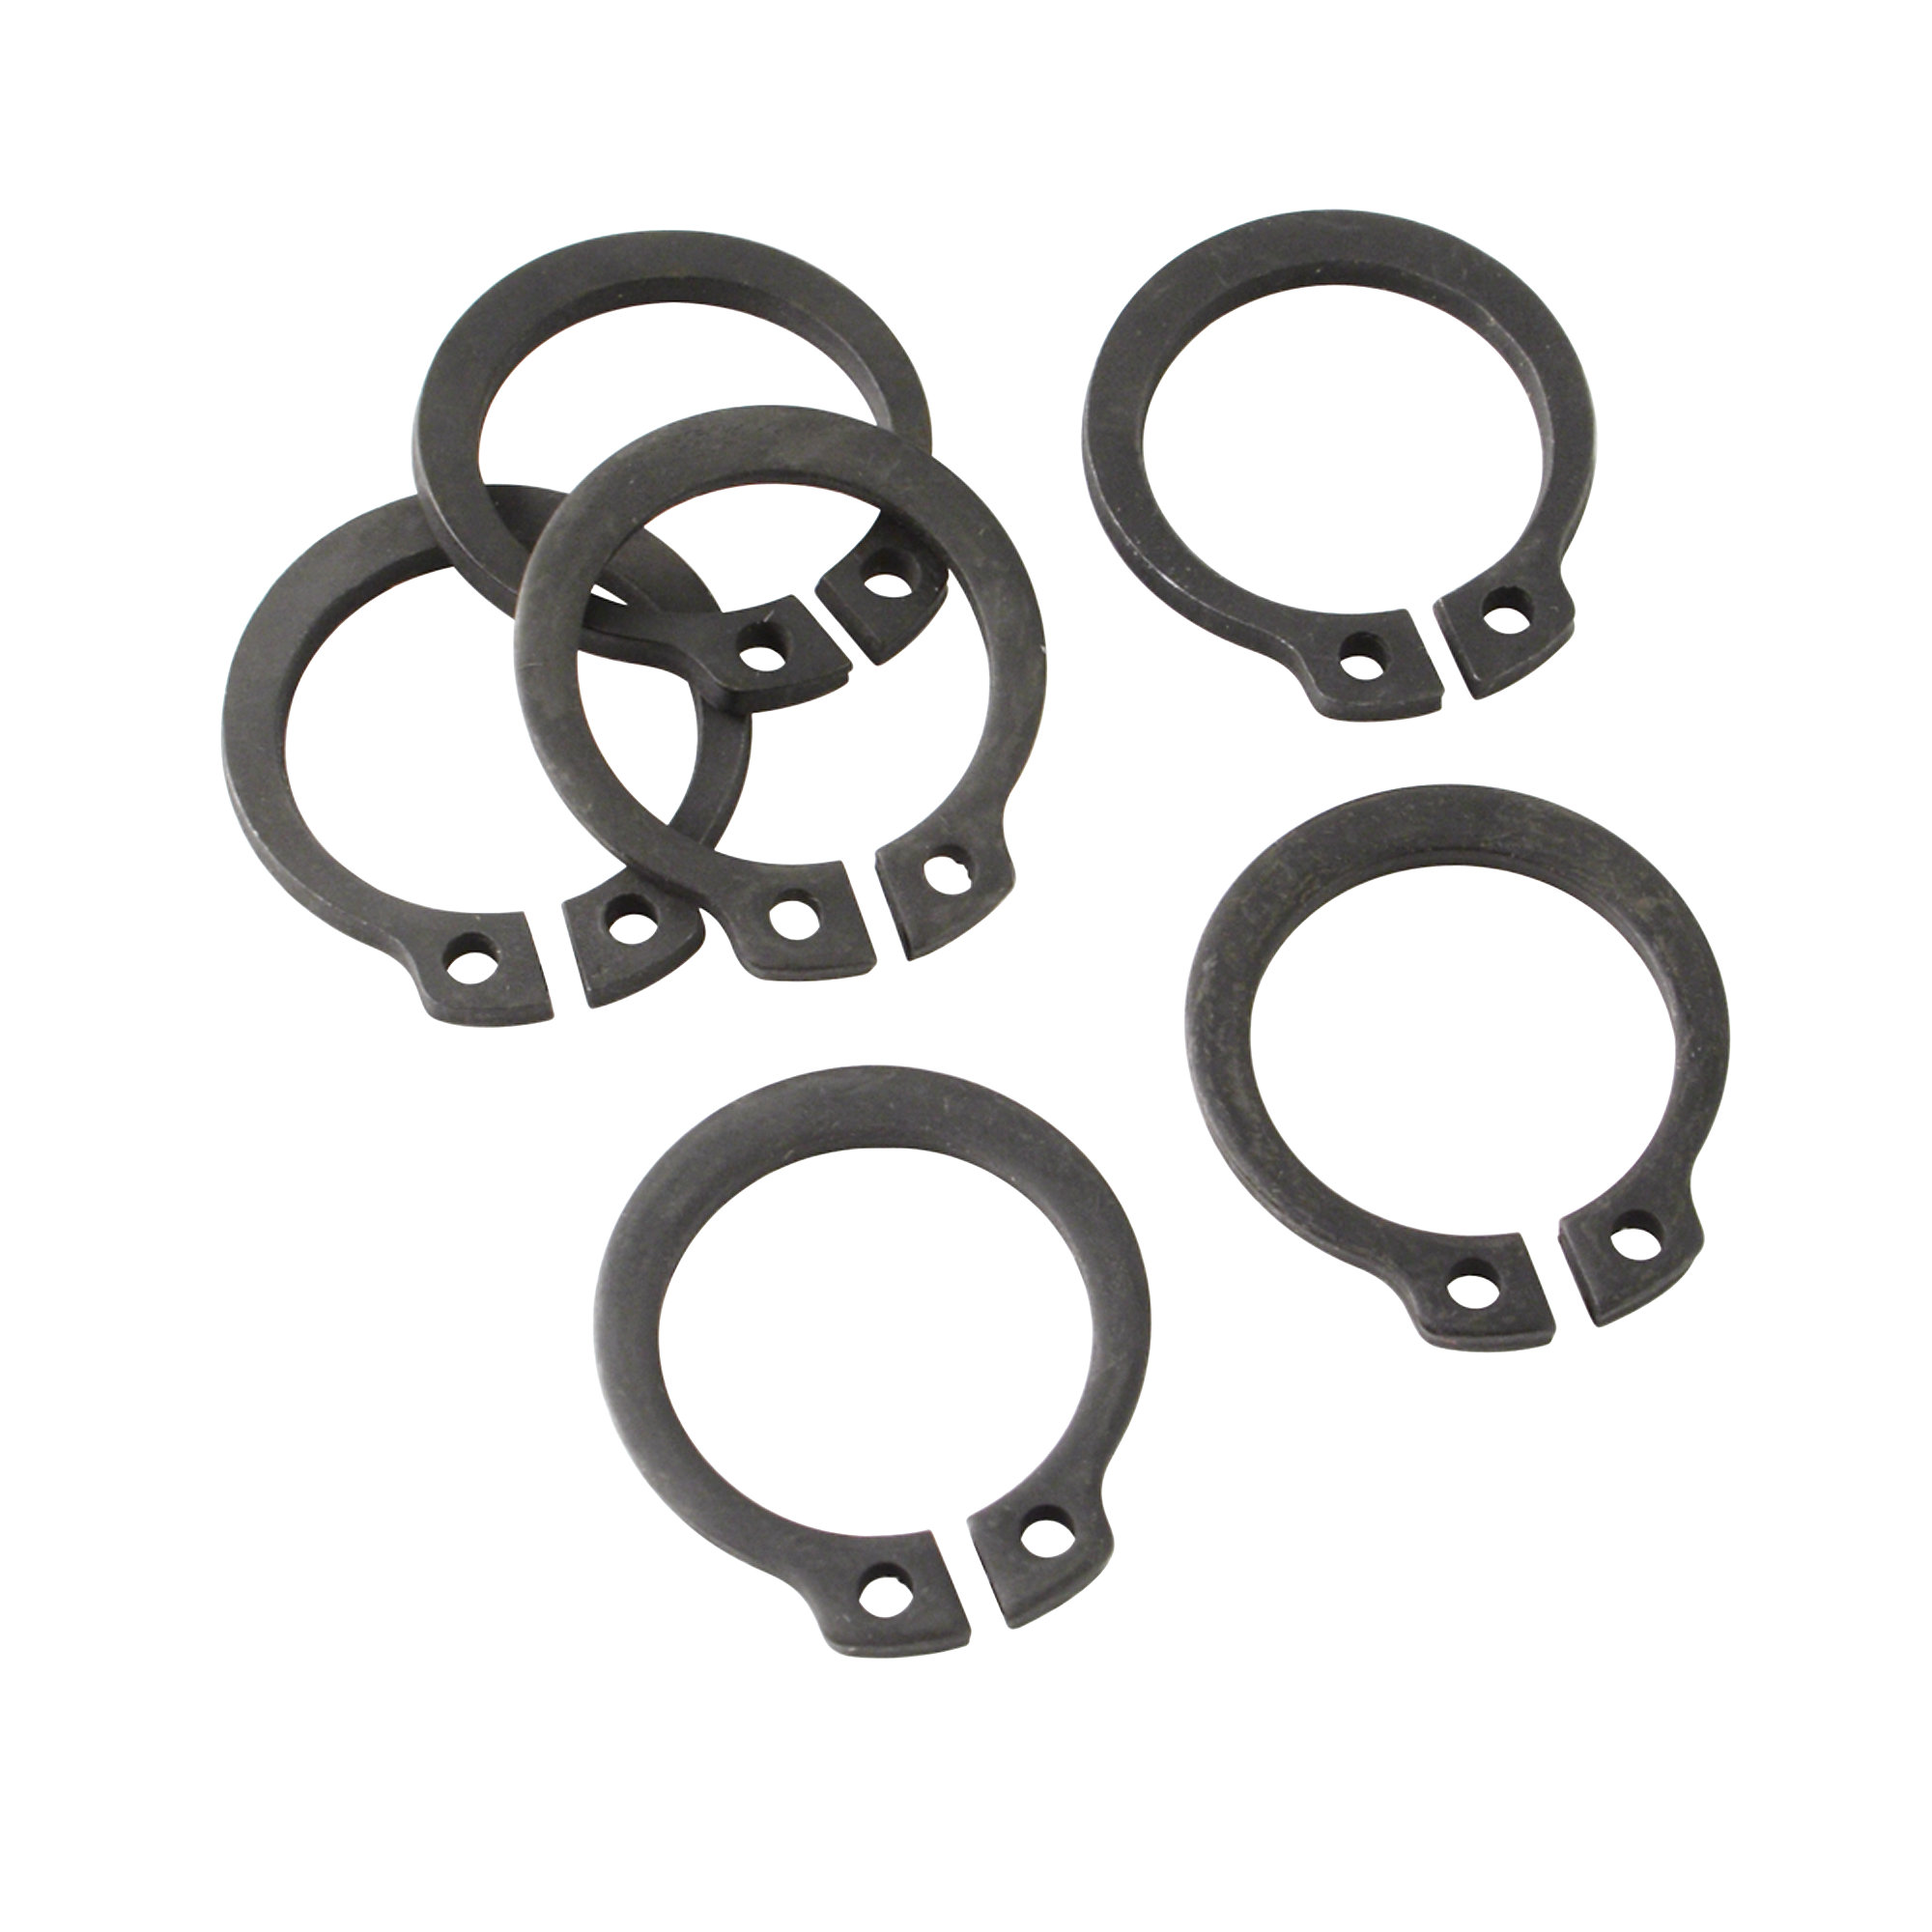 Pedal Arm Snap Ring Frame Post, 6 Pack